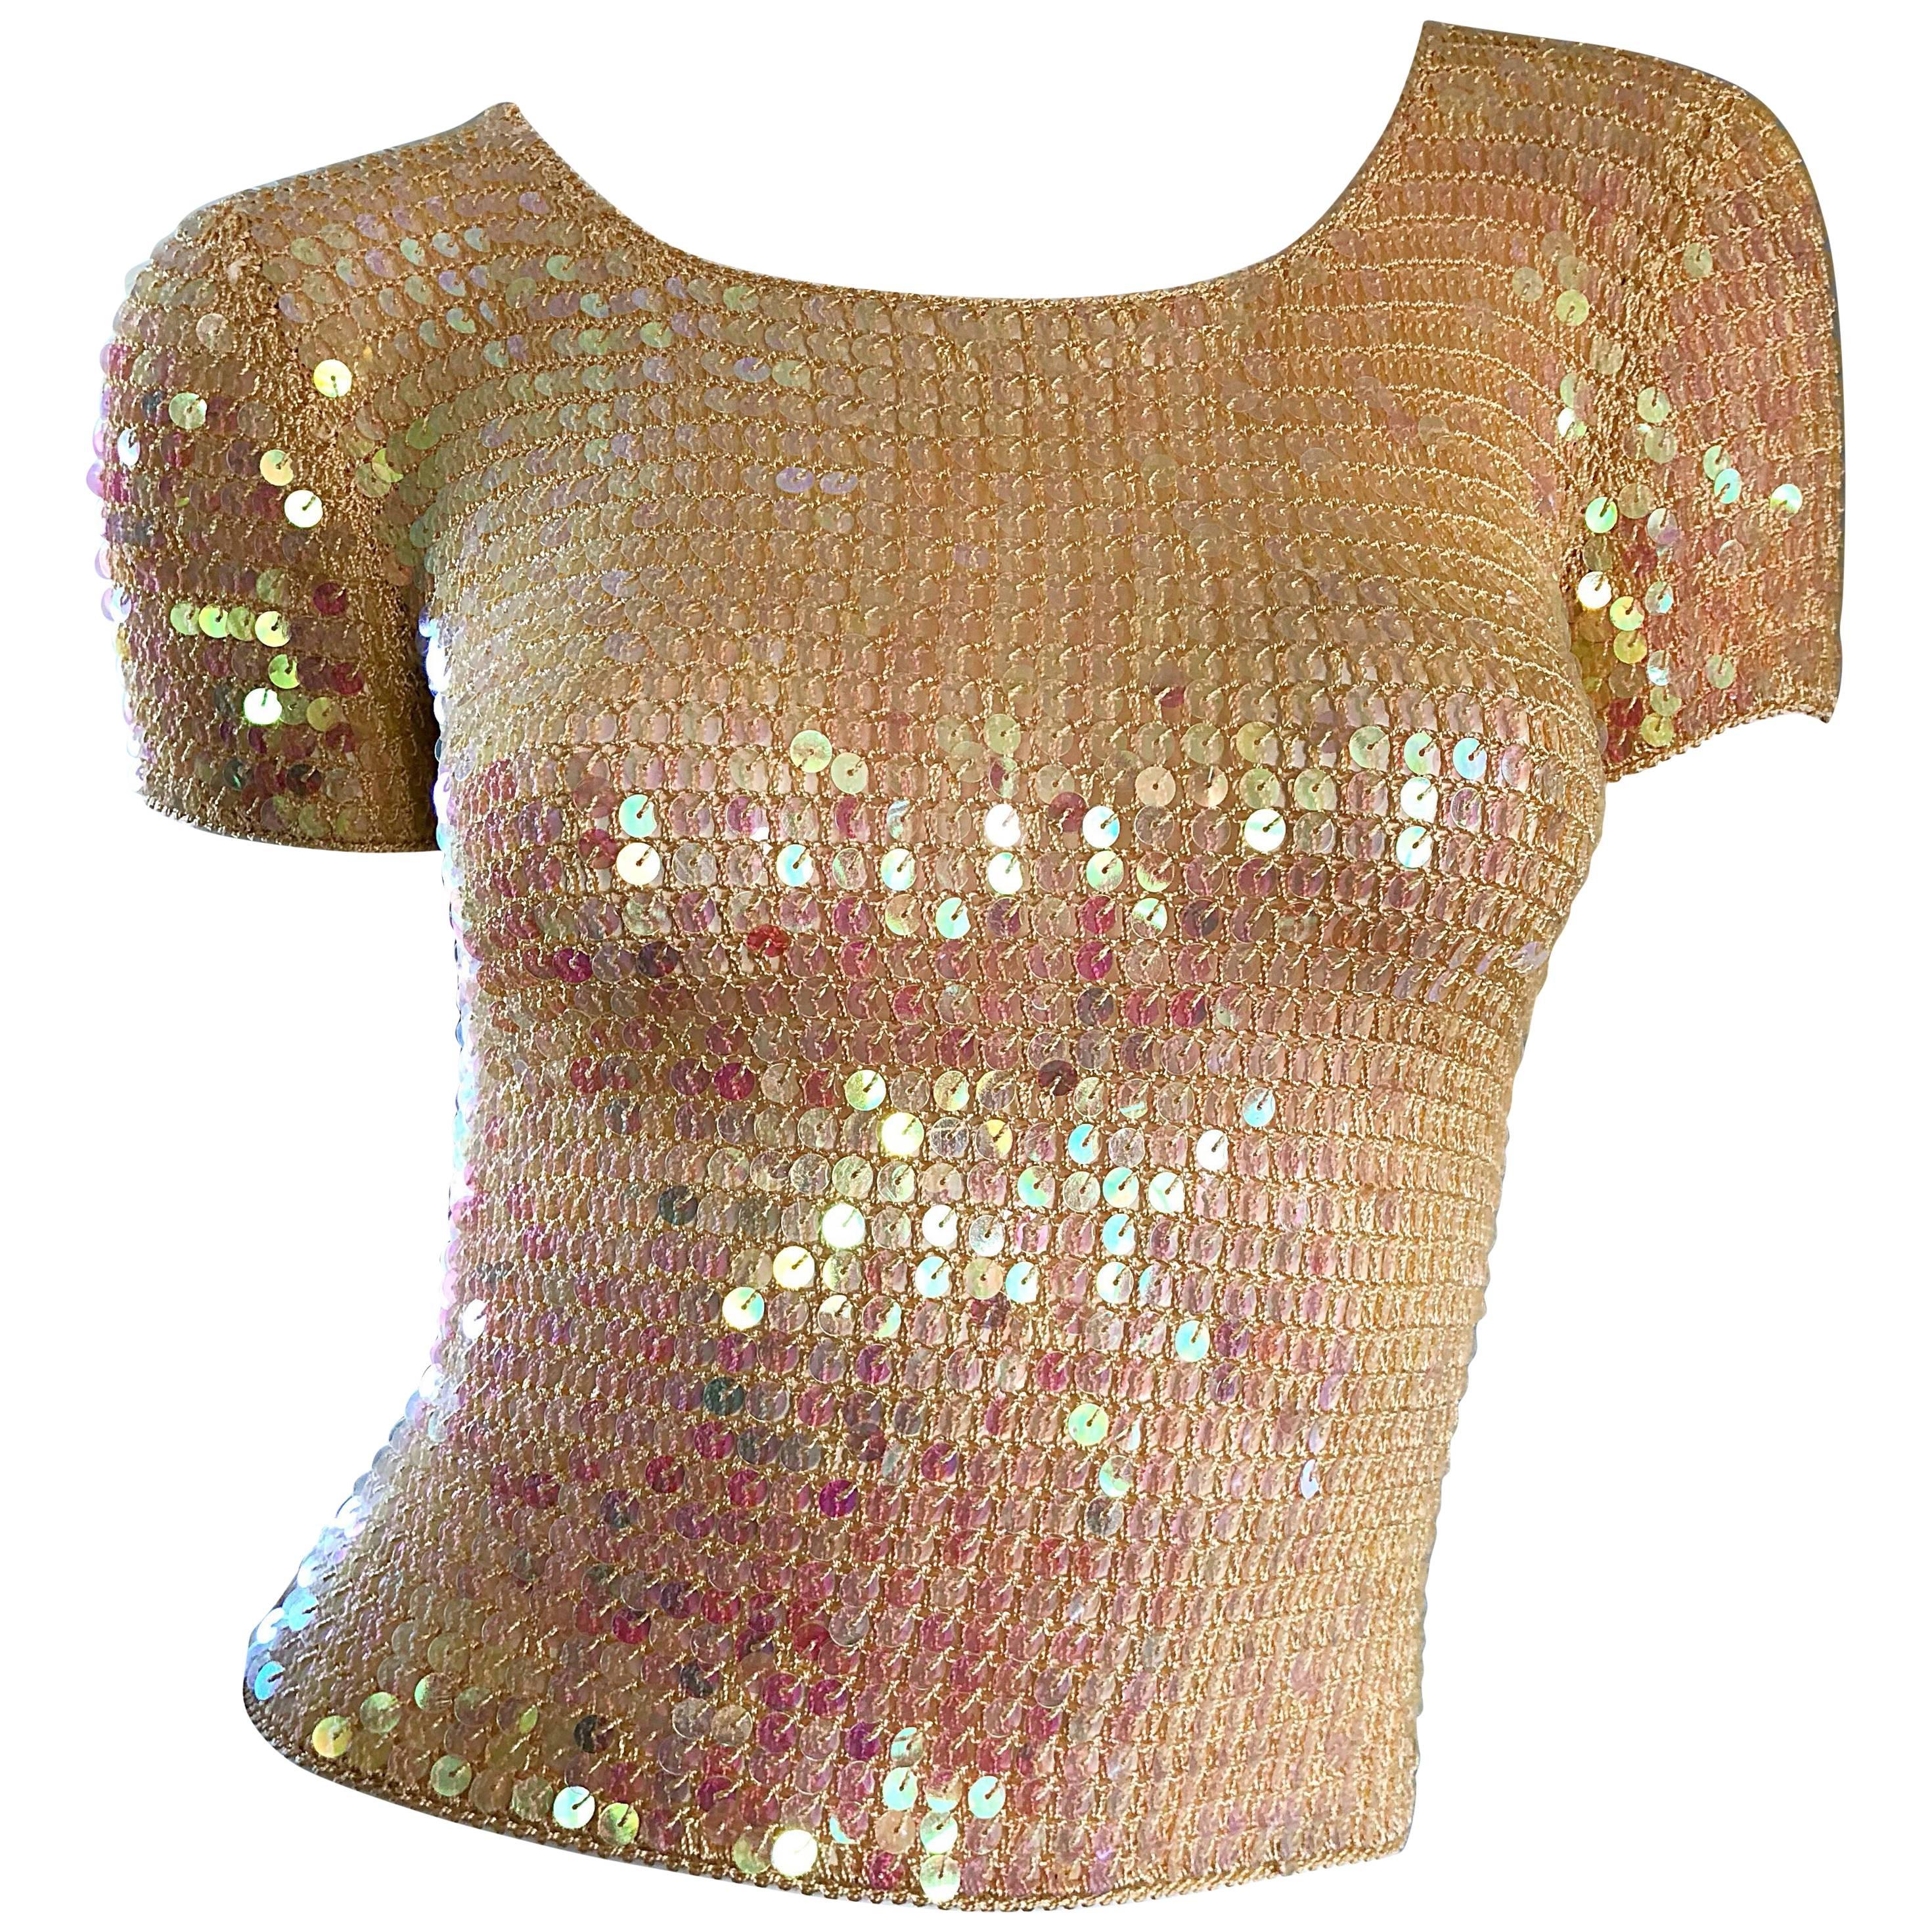 Fabulous 1990s Pink Champagne Fully Sequined Vintage Crochet Knit 90s Crop Top